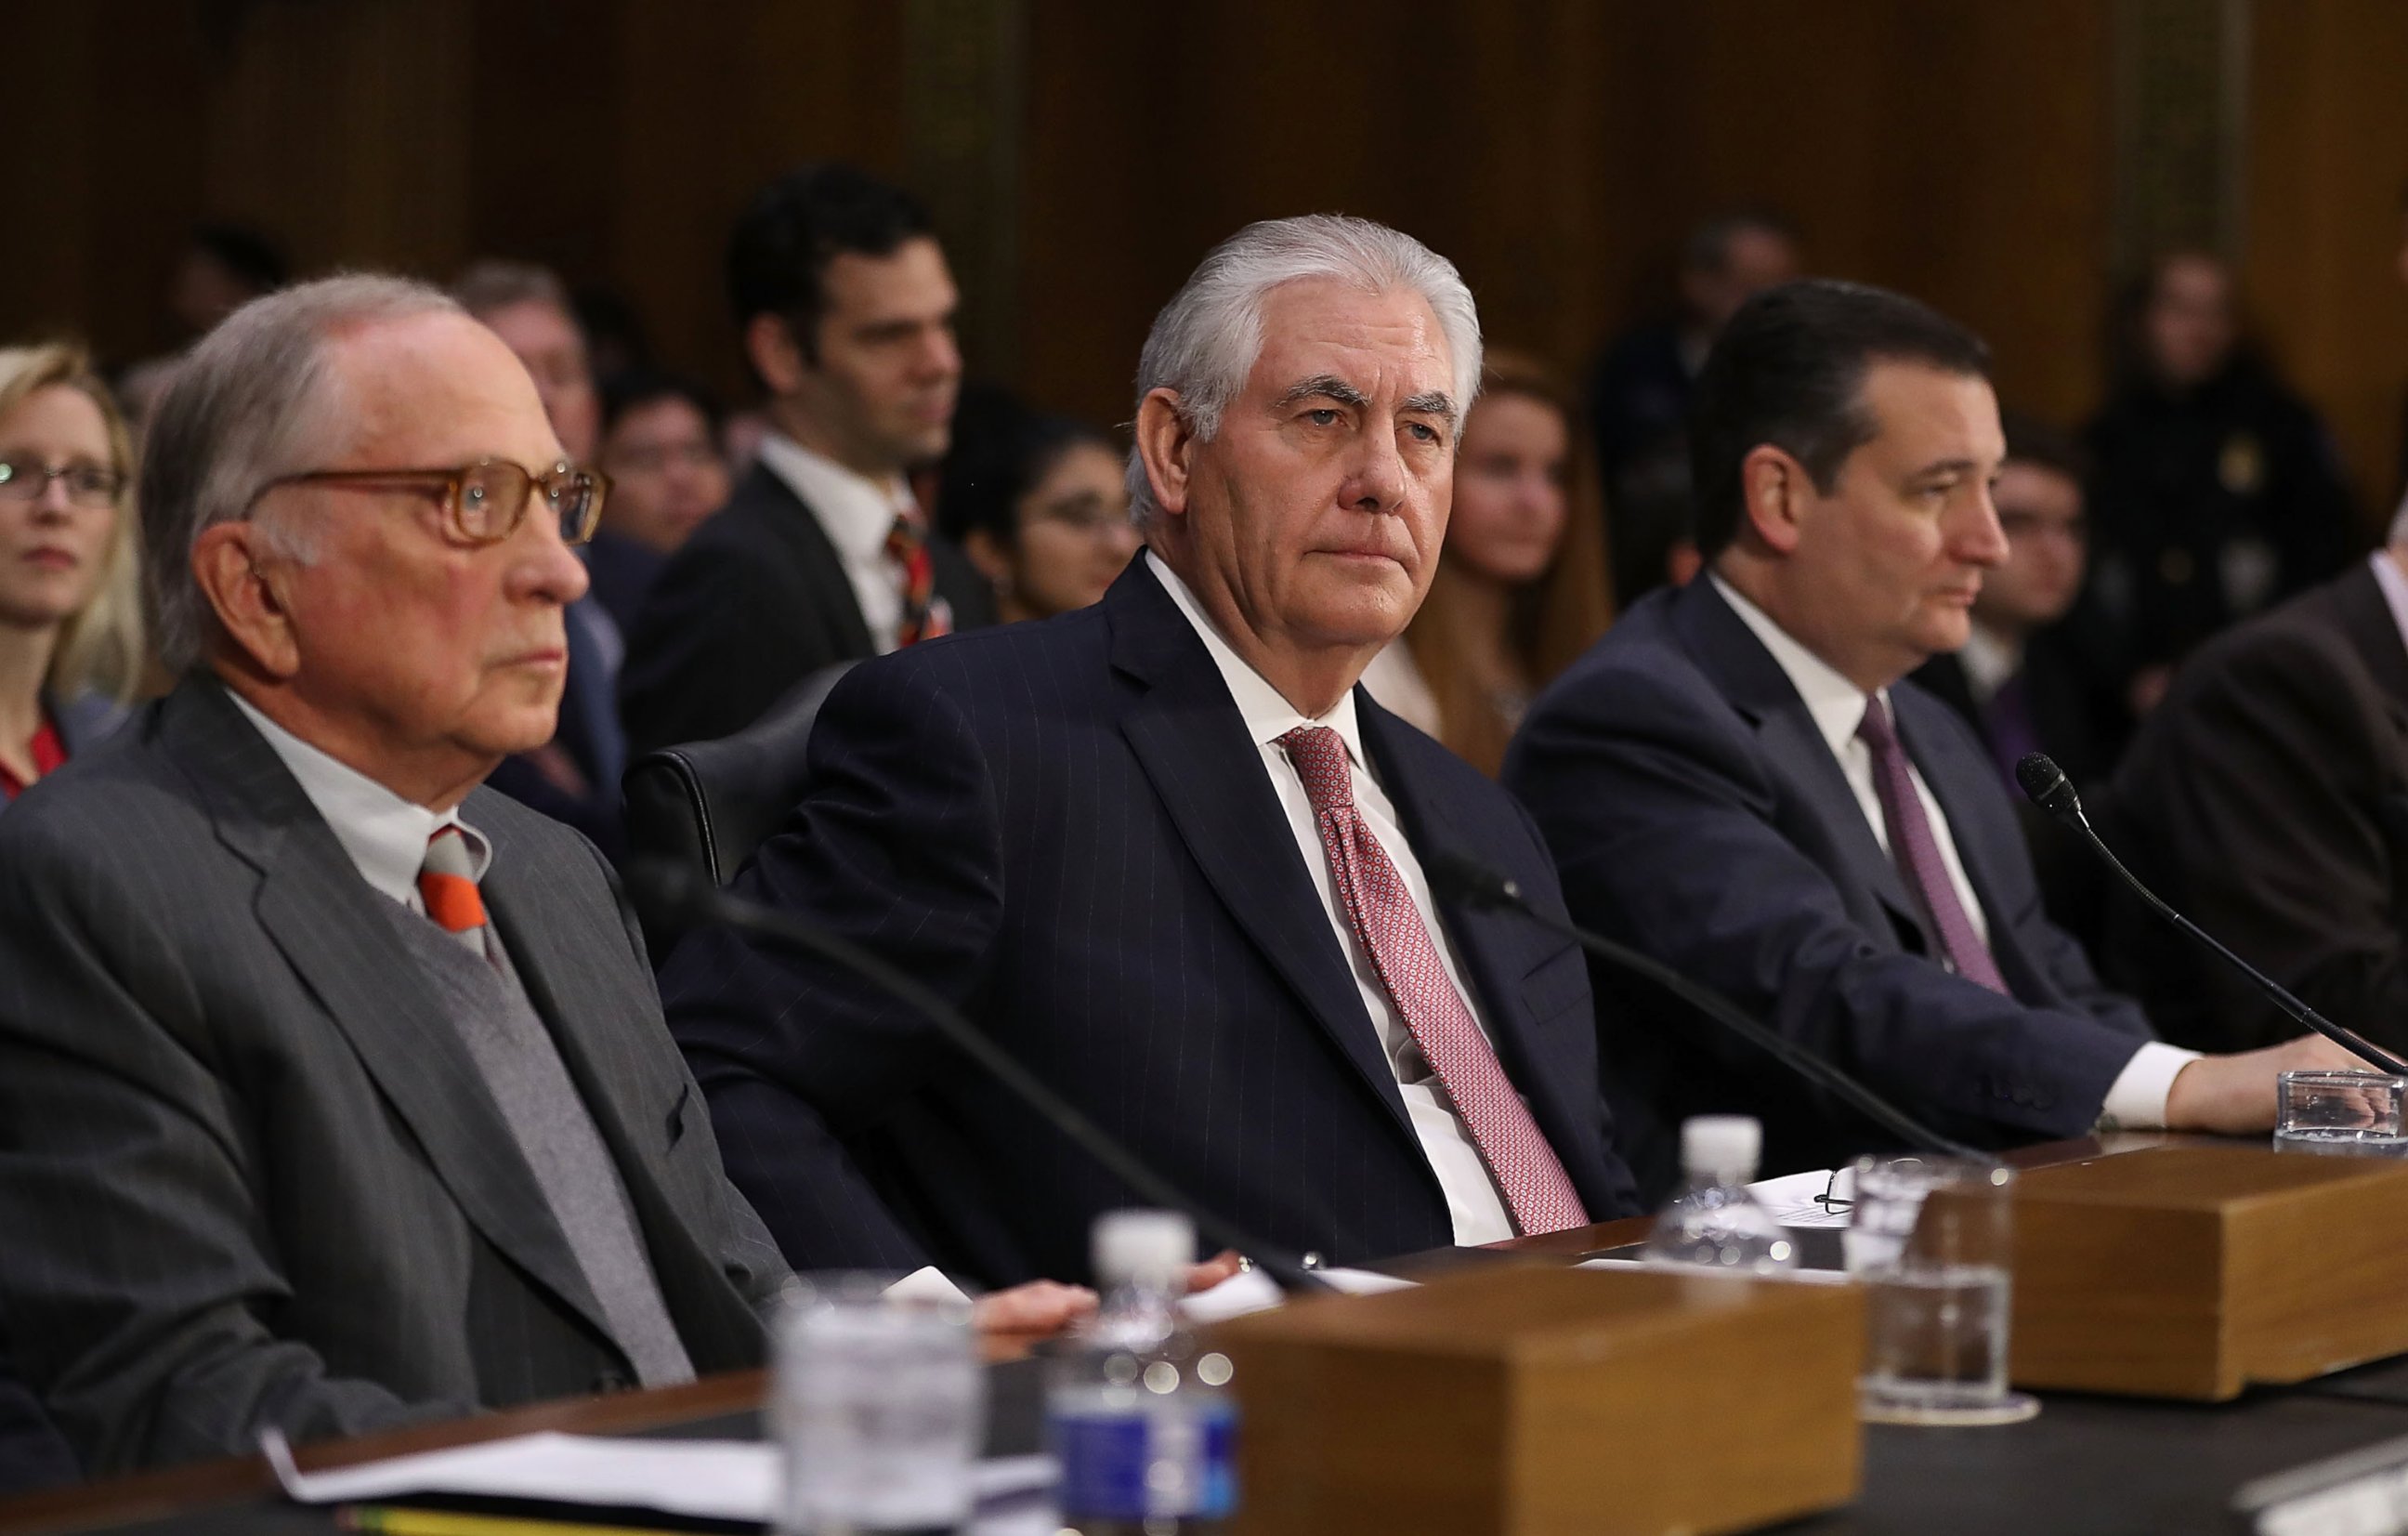 PHOTO: Rex Tillerson is seen here at his confirmation hearing for Secretary of State in the Dirksen Senate Office Building, Jan. 11, 2017, in Washington.